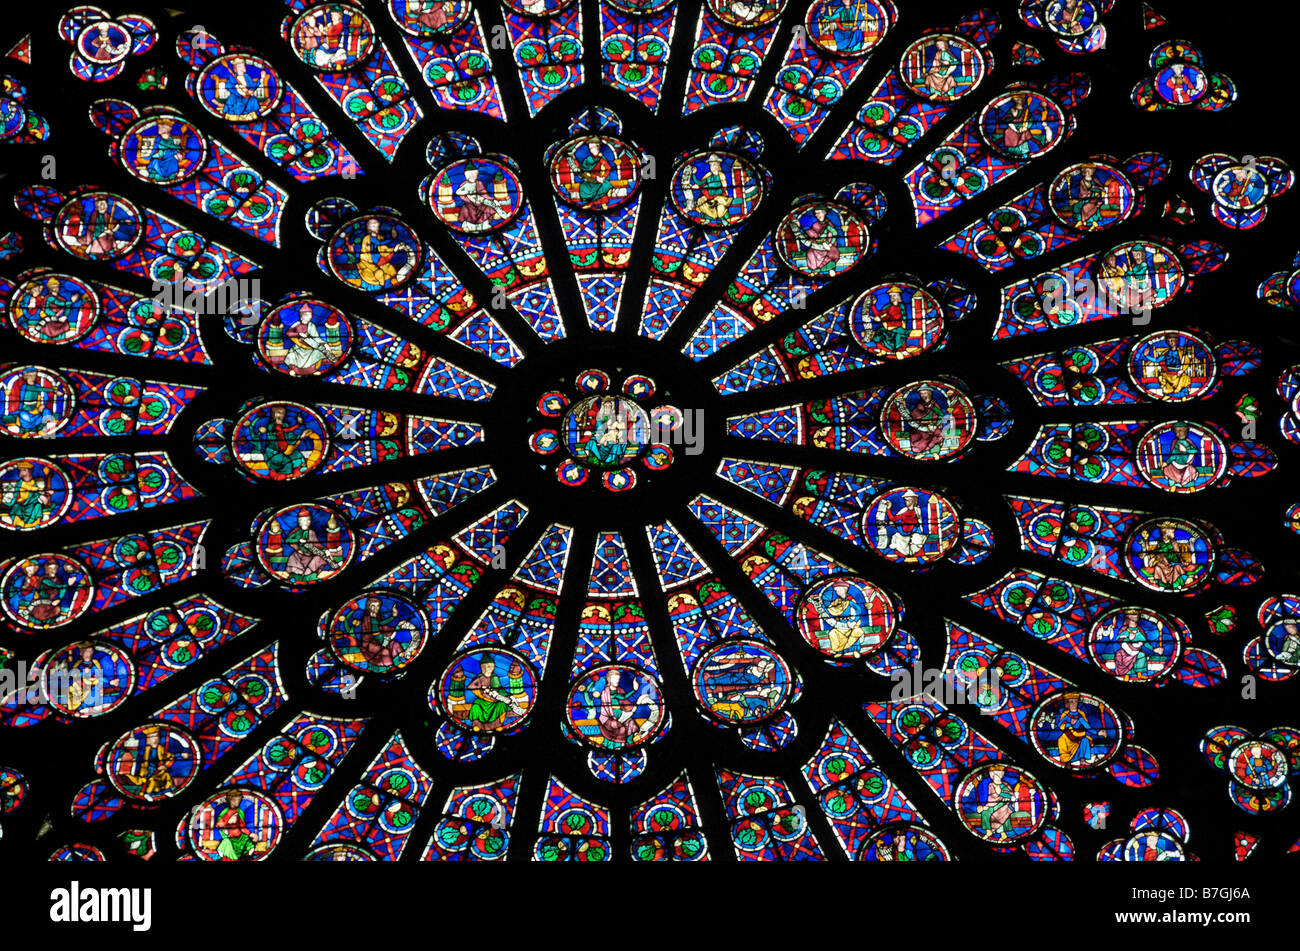 Rose Window : Famous stained glass window inside Notre Dame Cathedral, Paris, France Stock Photo